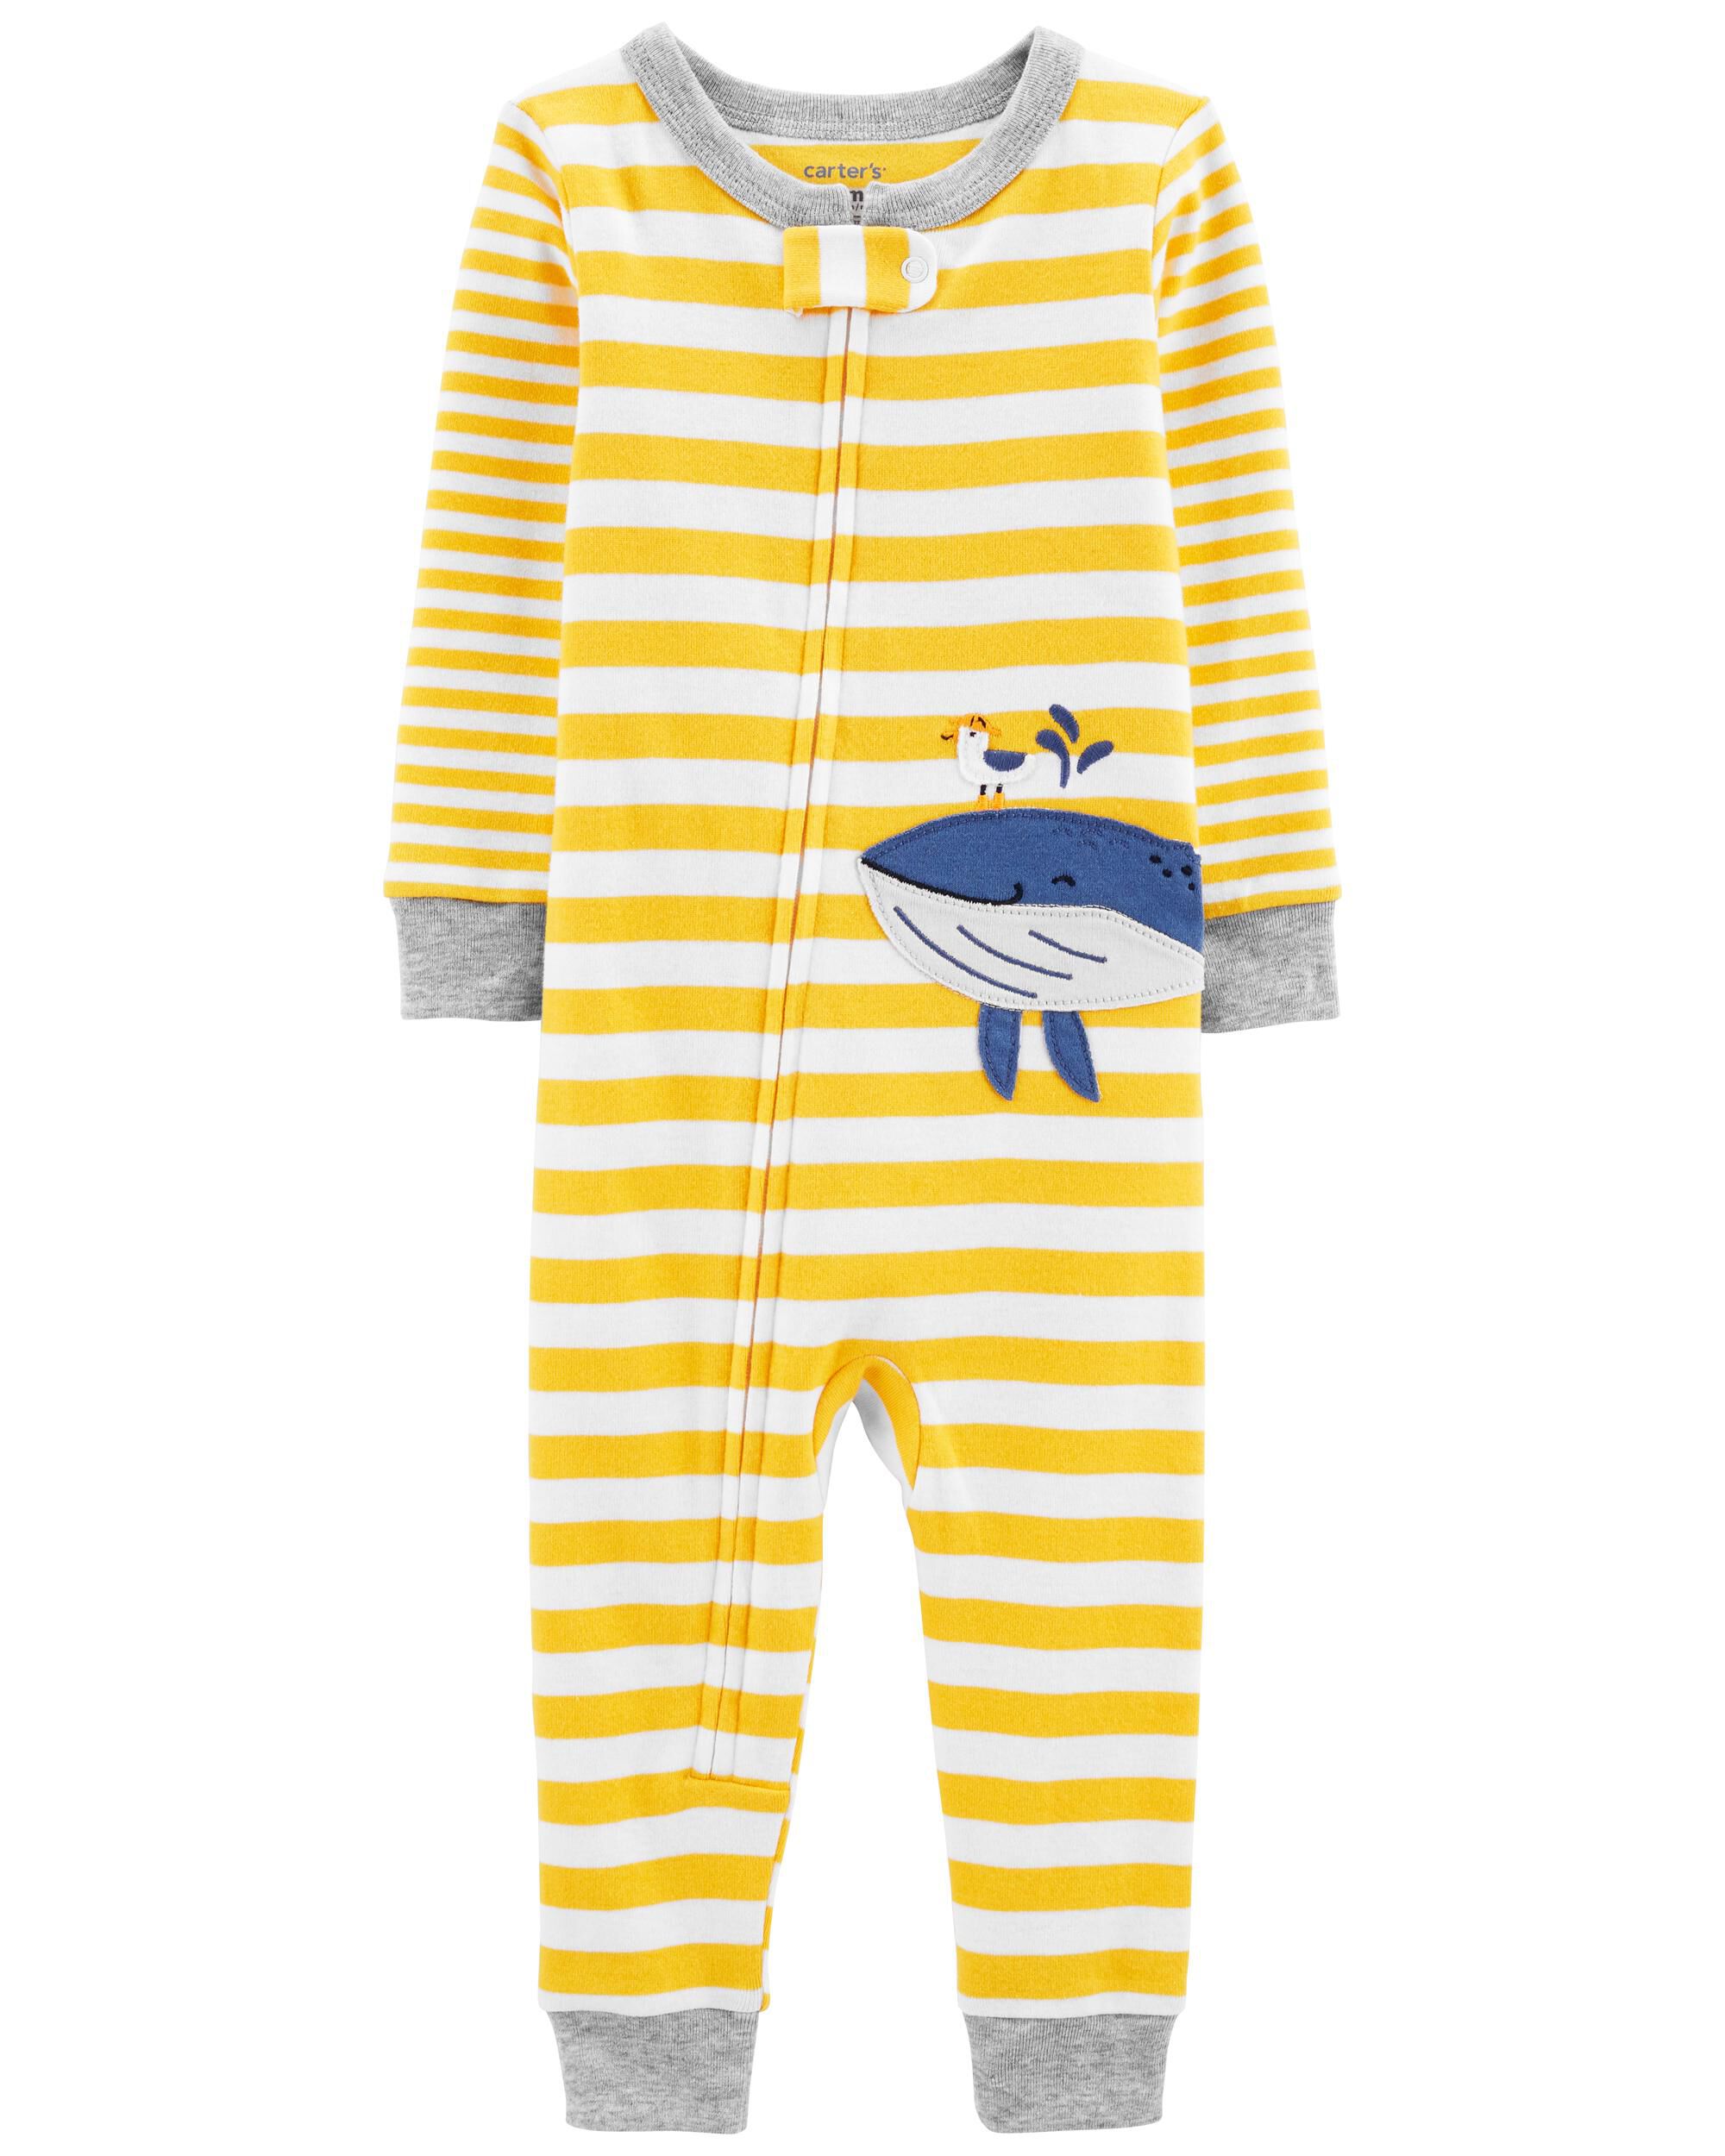 NWT CARTER'S FLEECE PAJAMAS cleared for bedtime airplane   3T 3 